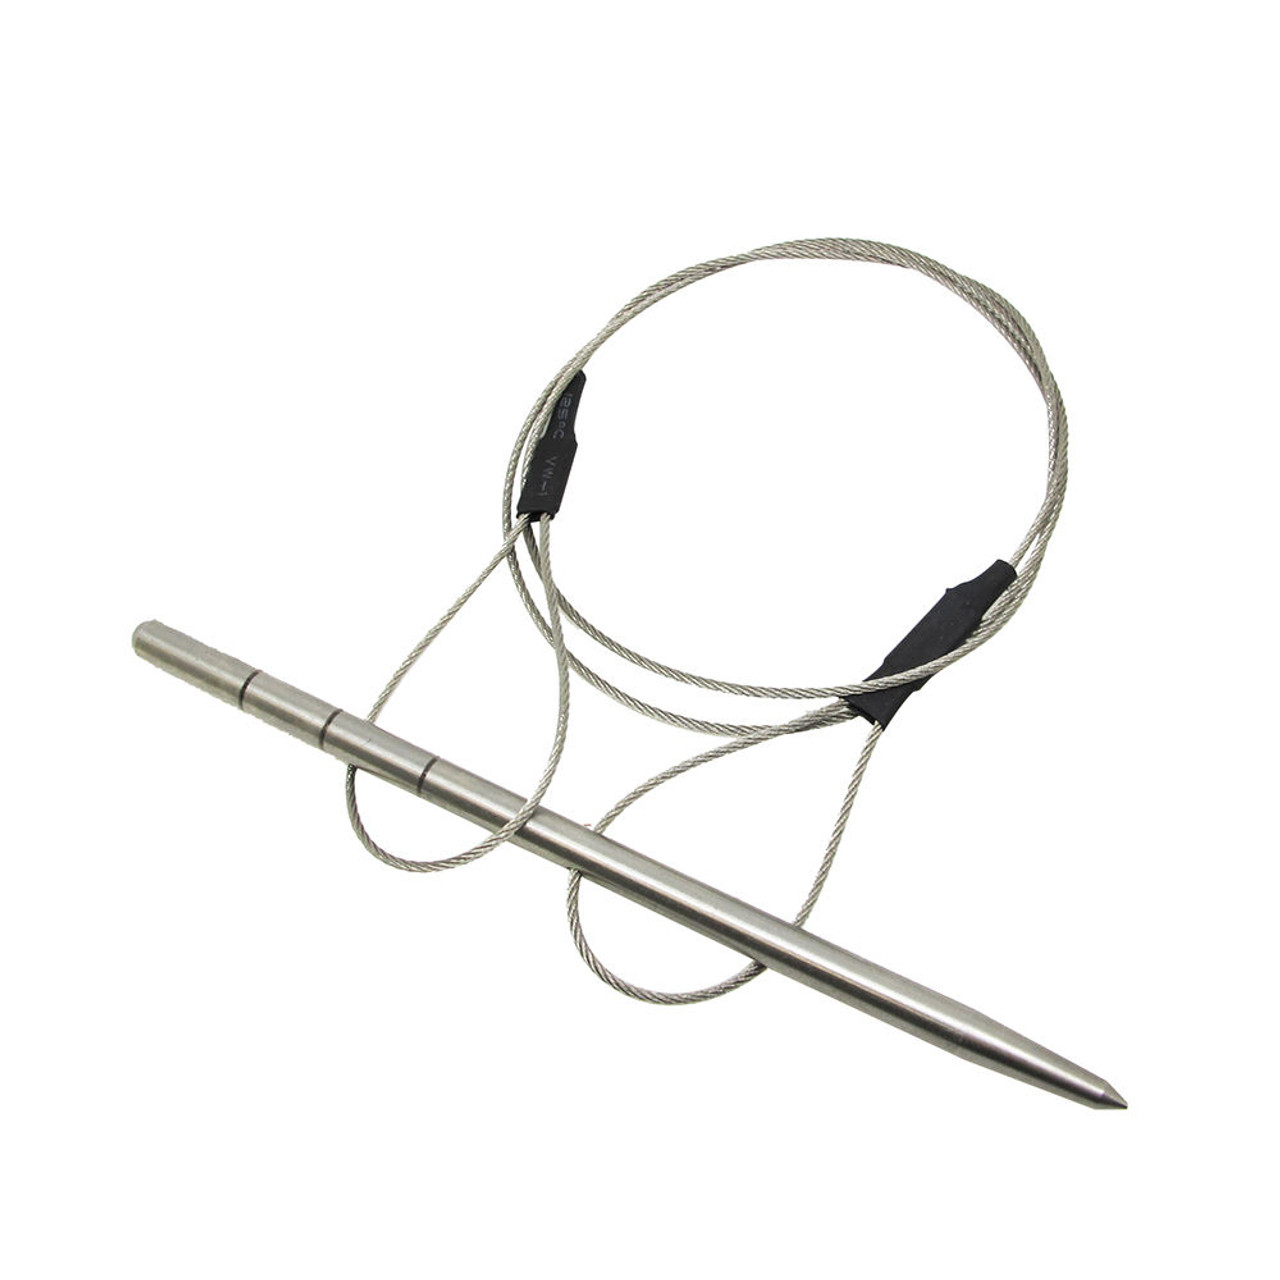 Spearfishing Compact Stainless Steel Fish Stringer Cable & 4.75 Rod -  scubachoice